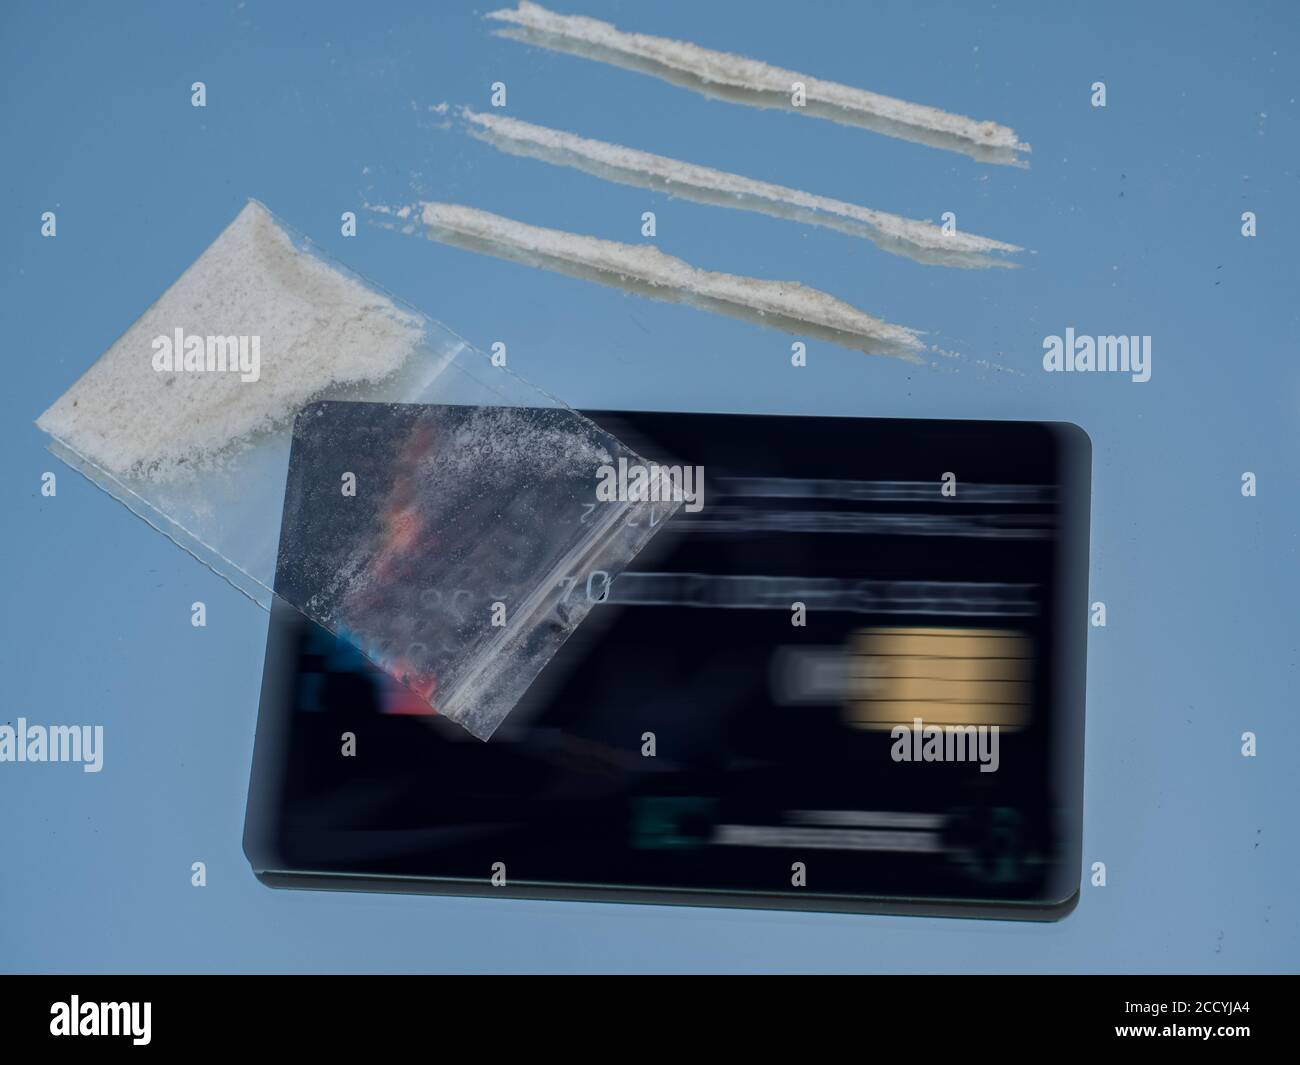 Crystal drug with bag and cash card Stock Photo